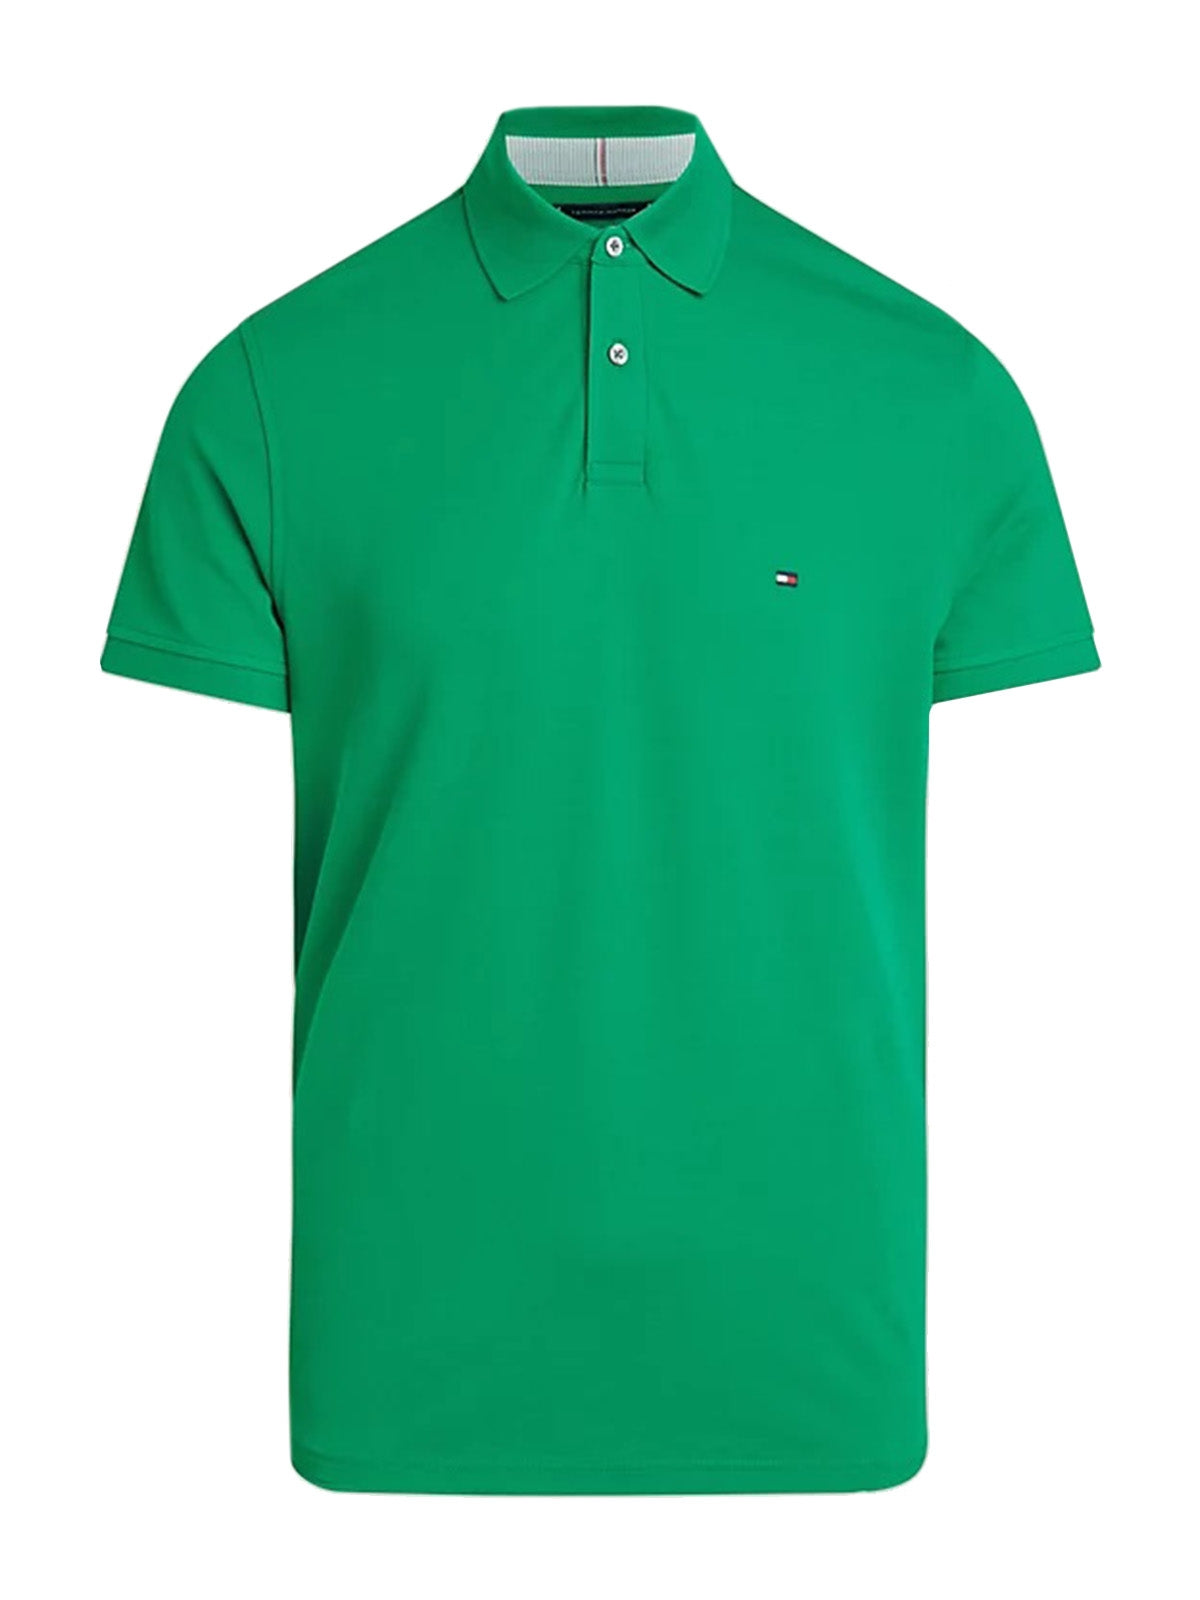 Polo Uomo Tommy Hilfiger - Polo 1985 Collection Regular Fit - Verde